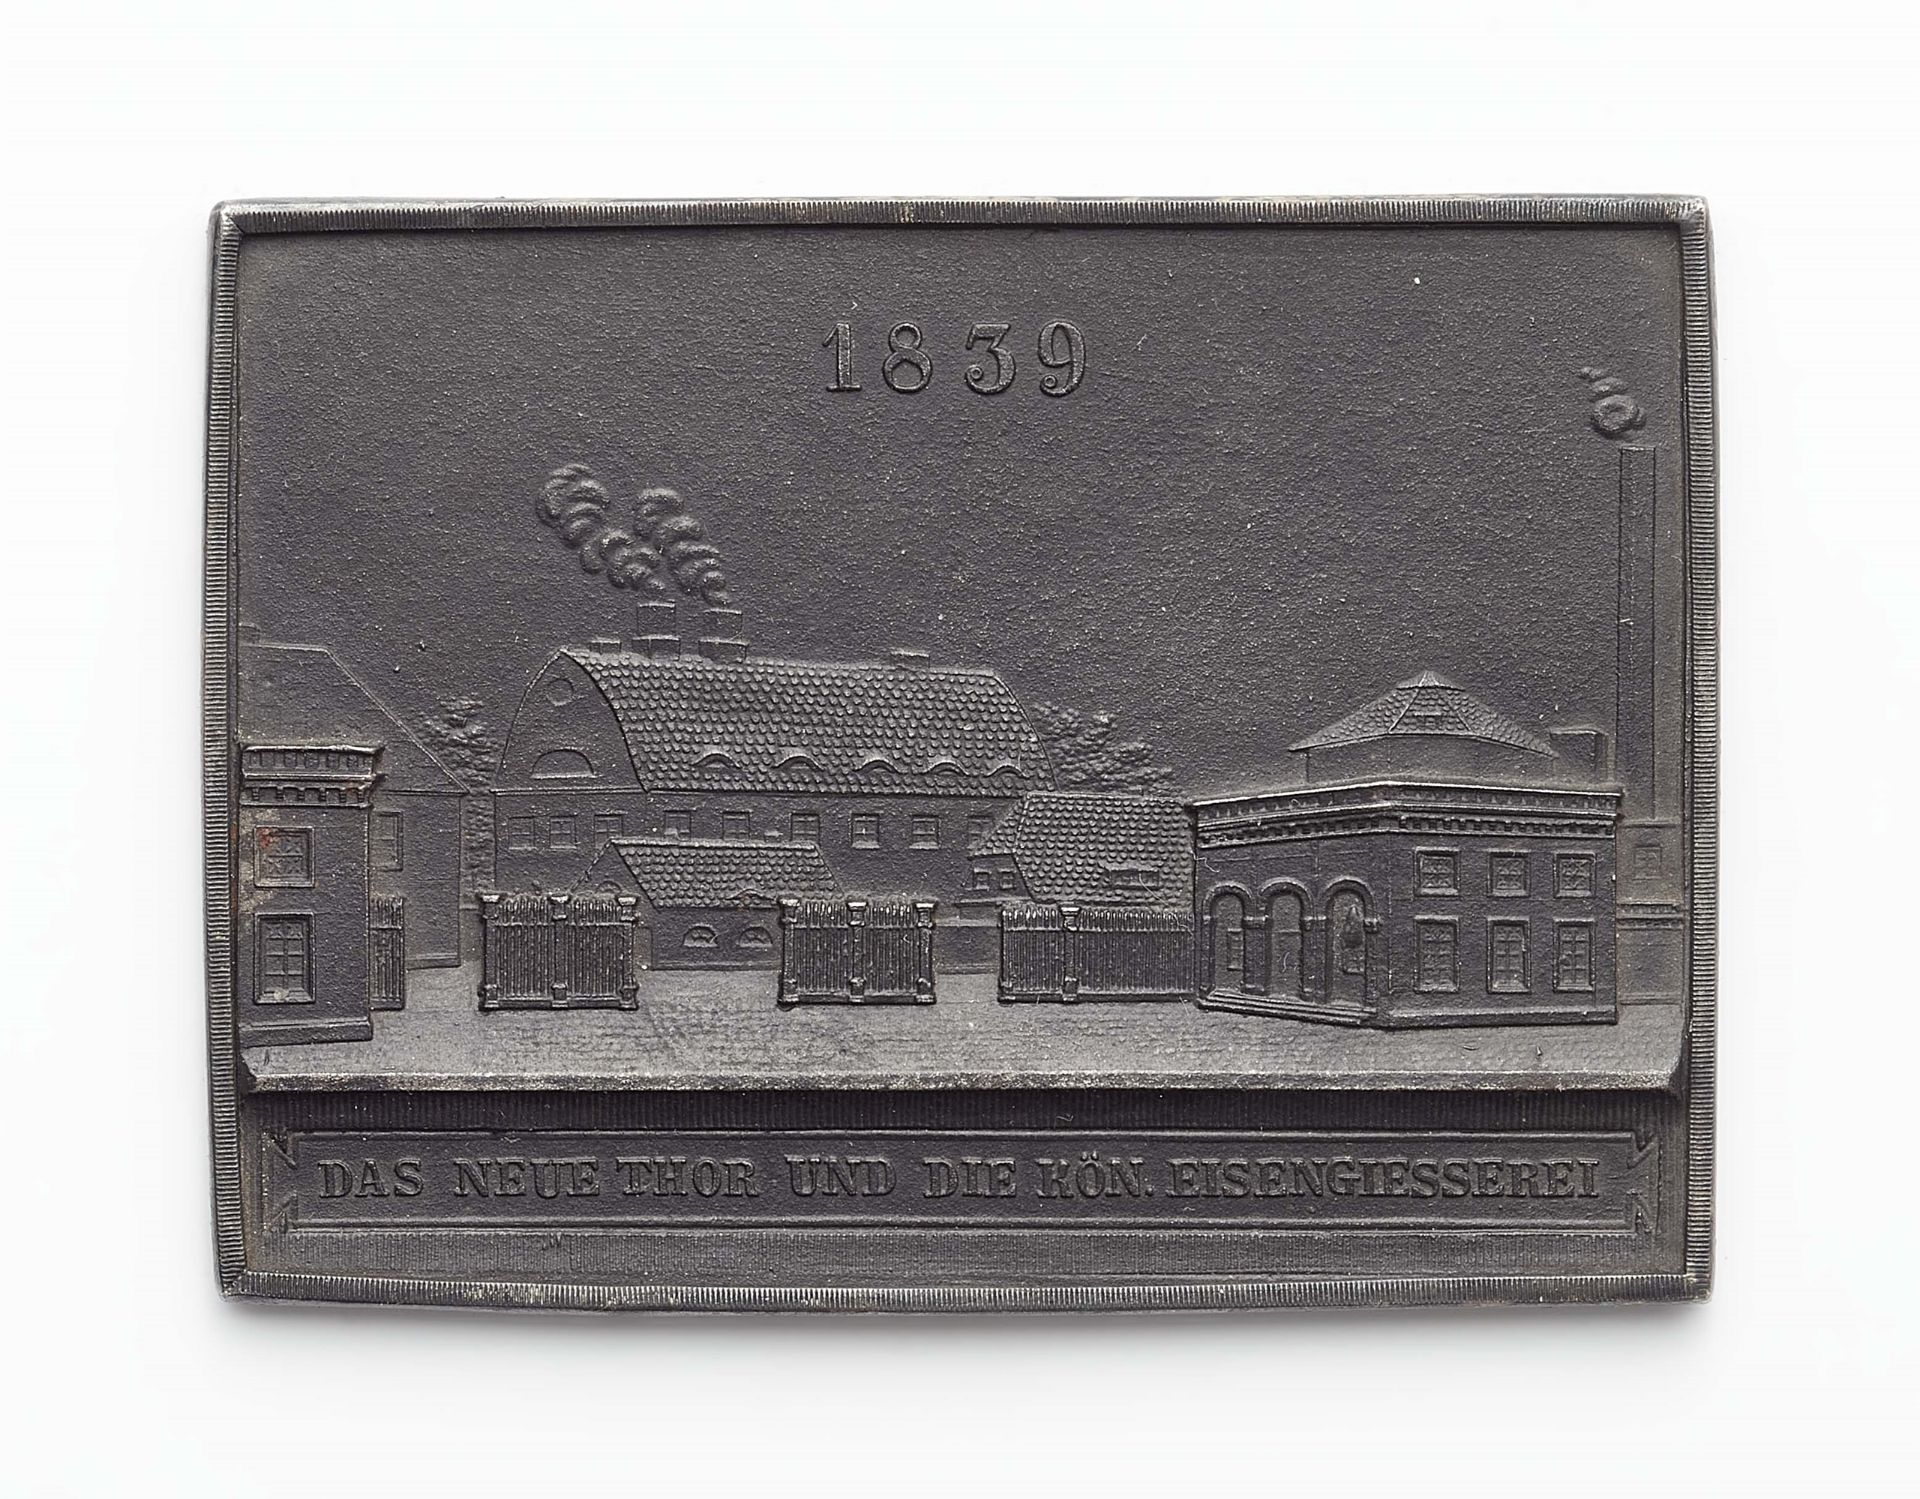 A double-sided cast iron New Year's plaque "1839"